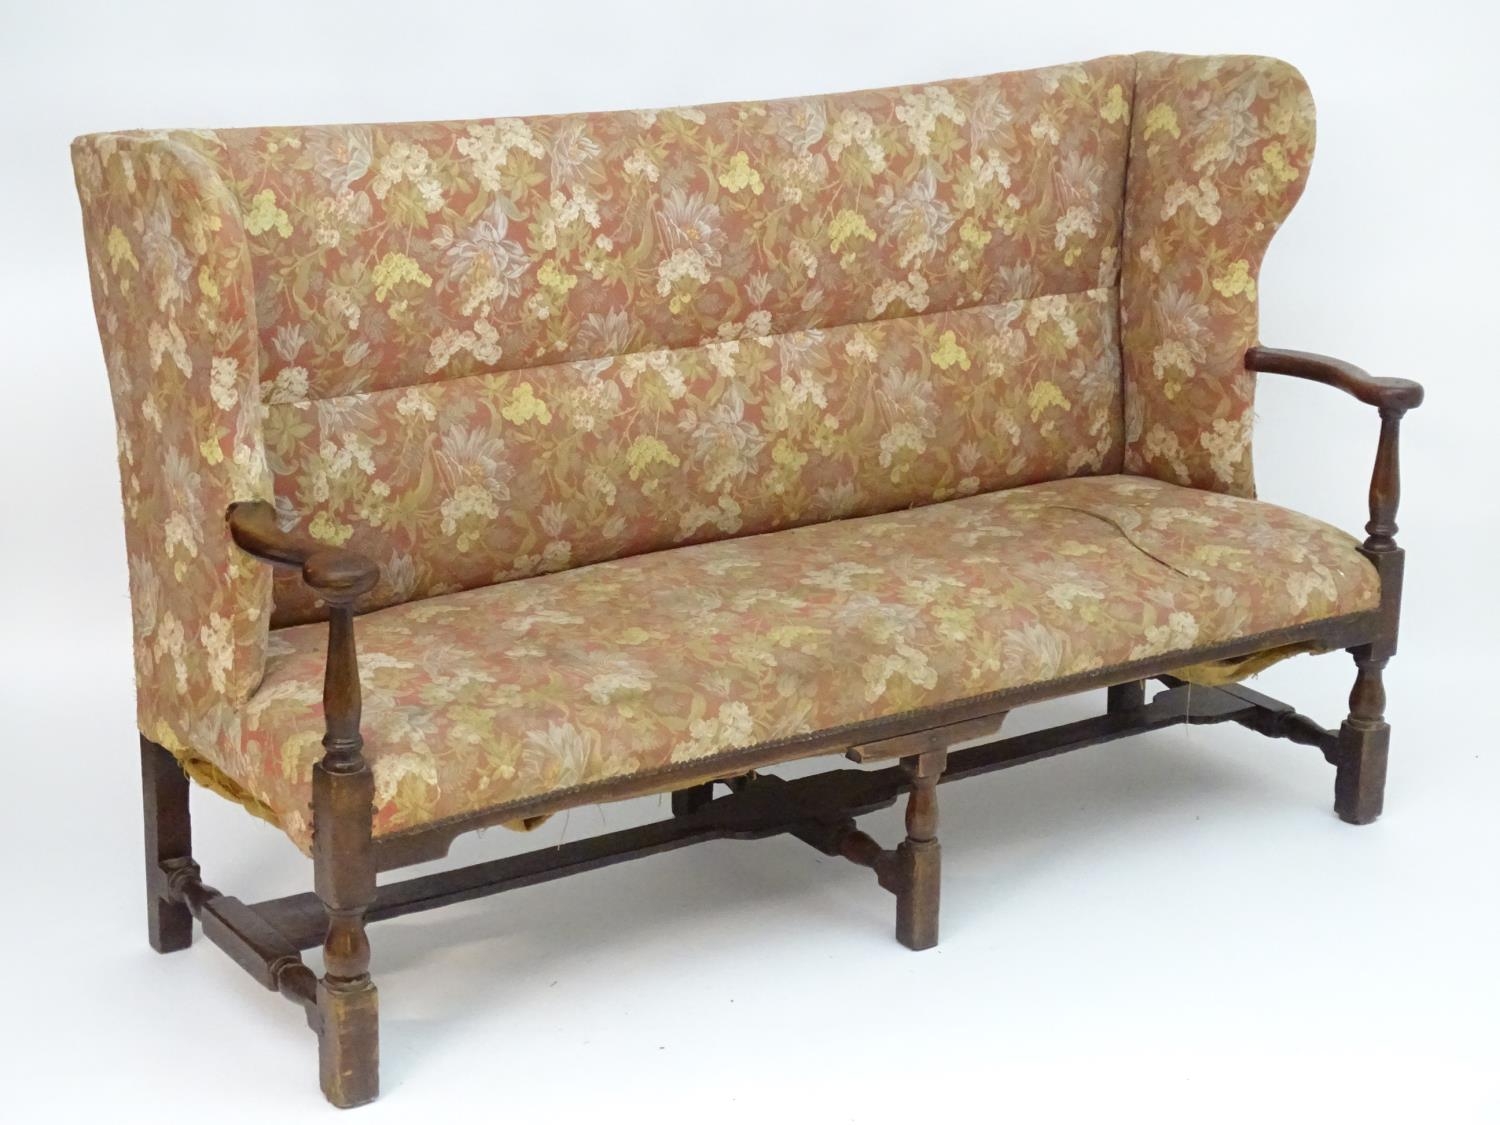 A mid 18thC wingback sofa with scrolled arms and an upholstered backrest and seat above a - Image 2 of 12